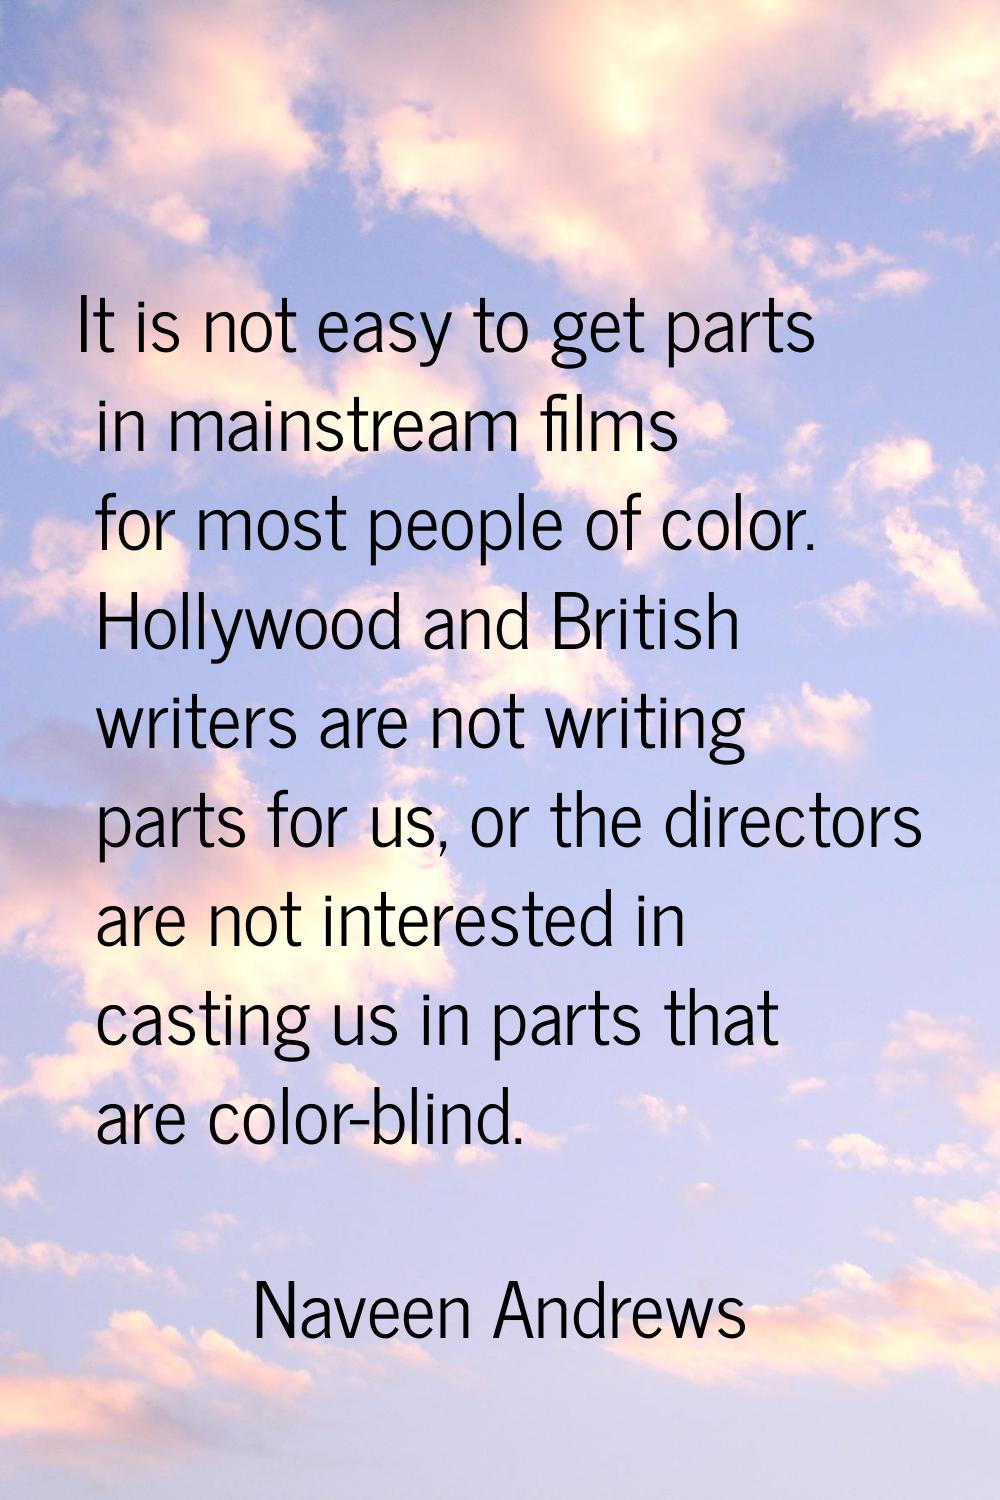 It is not easy to get parts in mainstream films for most people of color. Hollywood and British wri